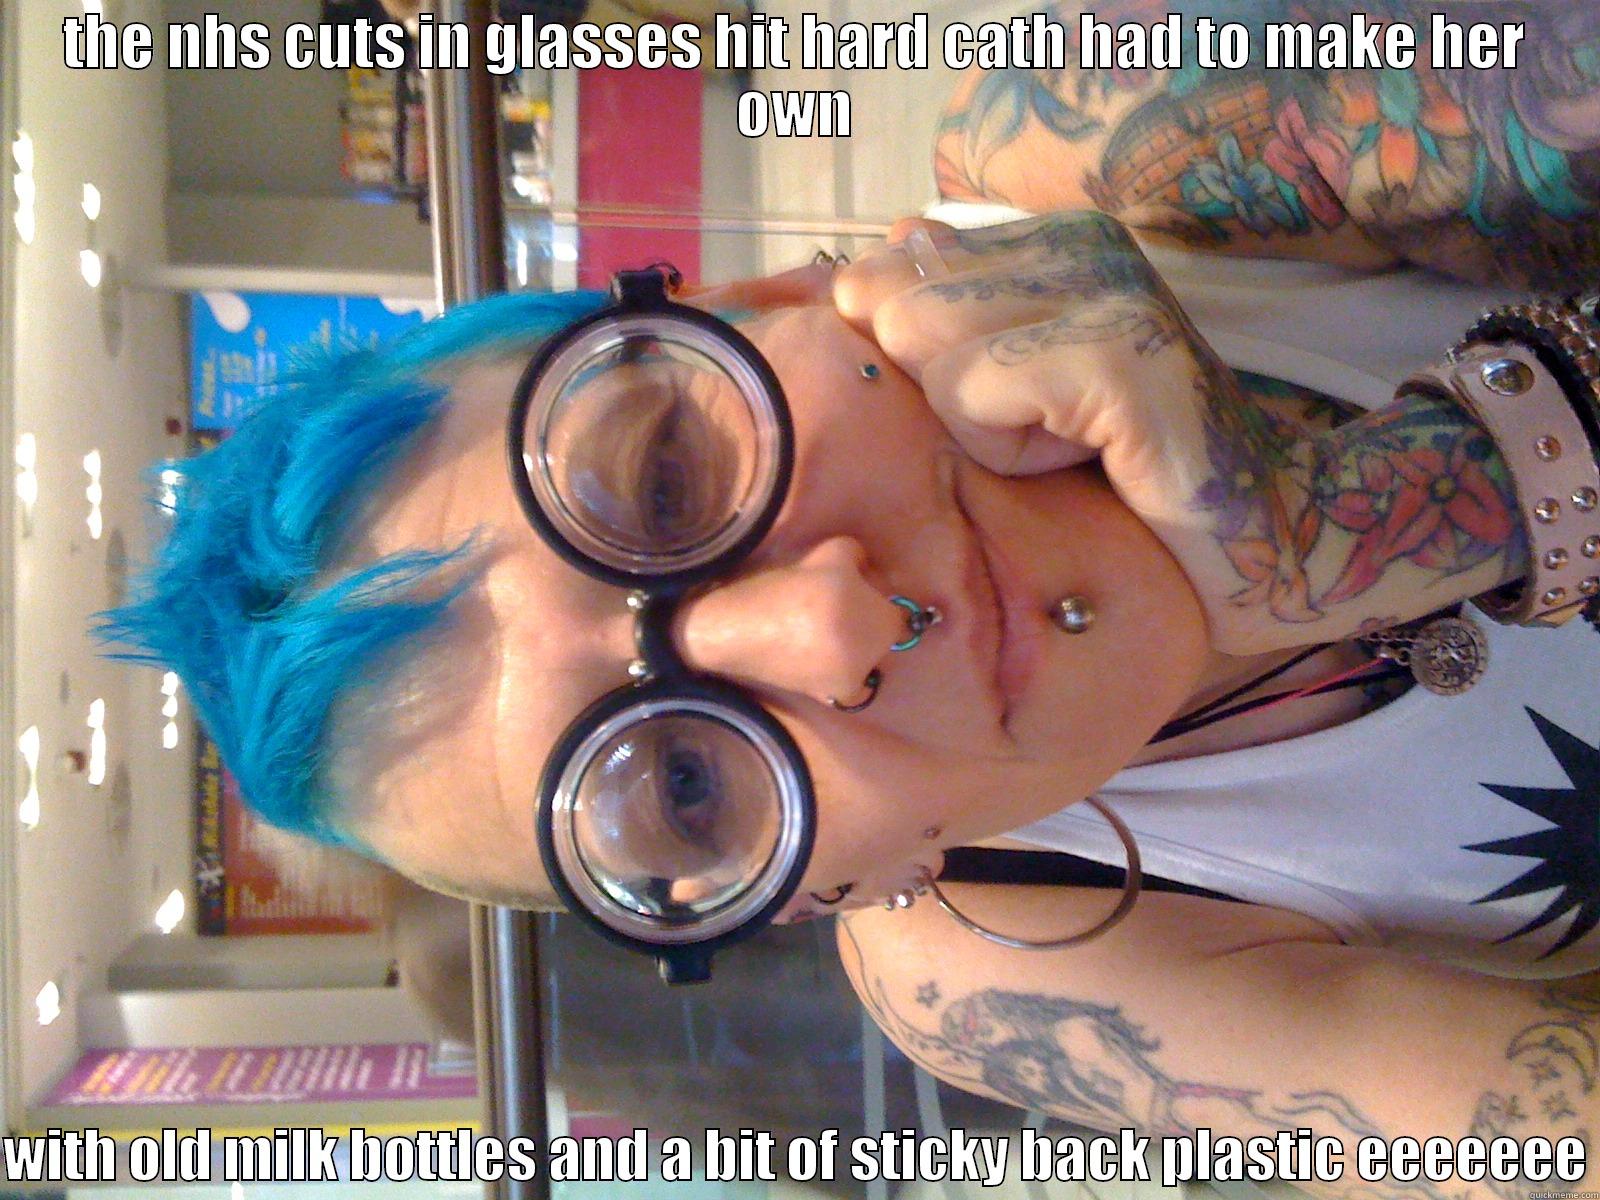 THE NHS CUTS IN GLASSES HIT HARD CATH HAD TO MAKE HER OWN  WITH OLD MILK BOTTLES AND A BIT OF STICKY BACK PLASTIC EEEEEEE Misc